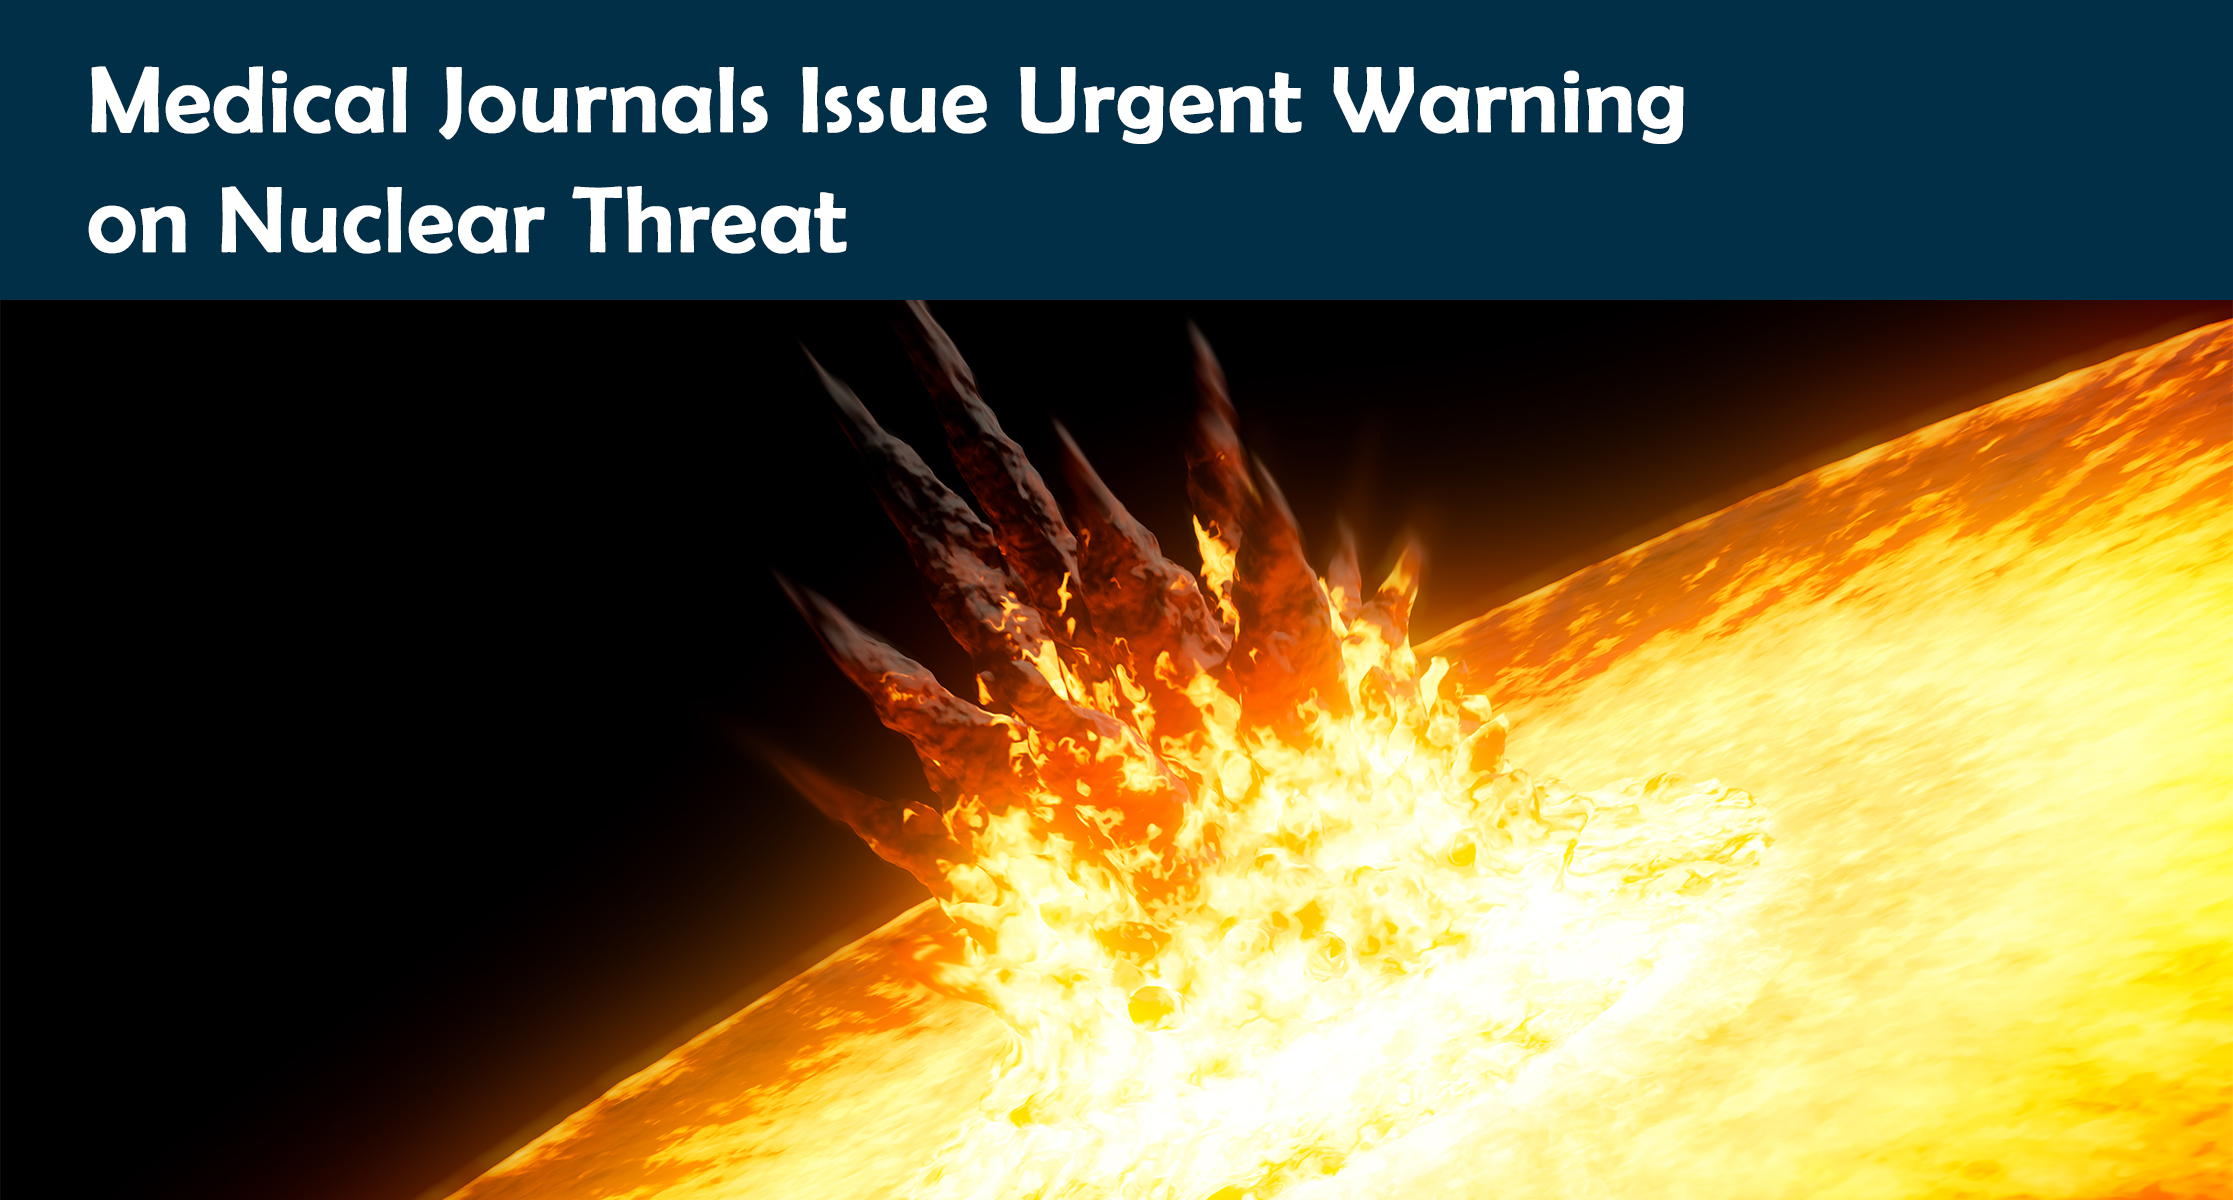 Medical Journals Issue Urgent Warning on Nuclear Threat